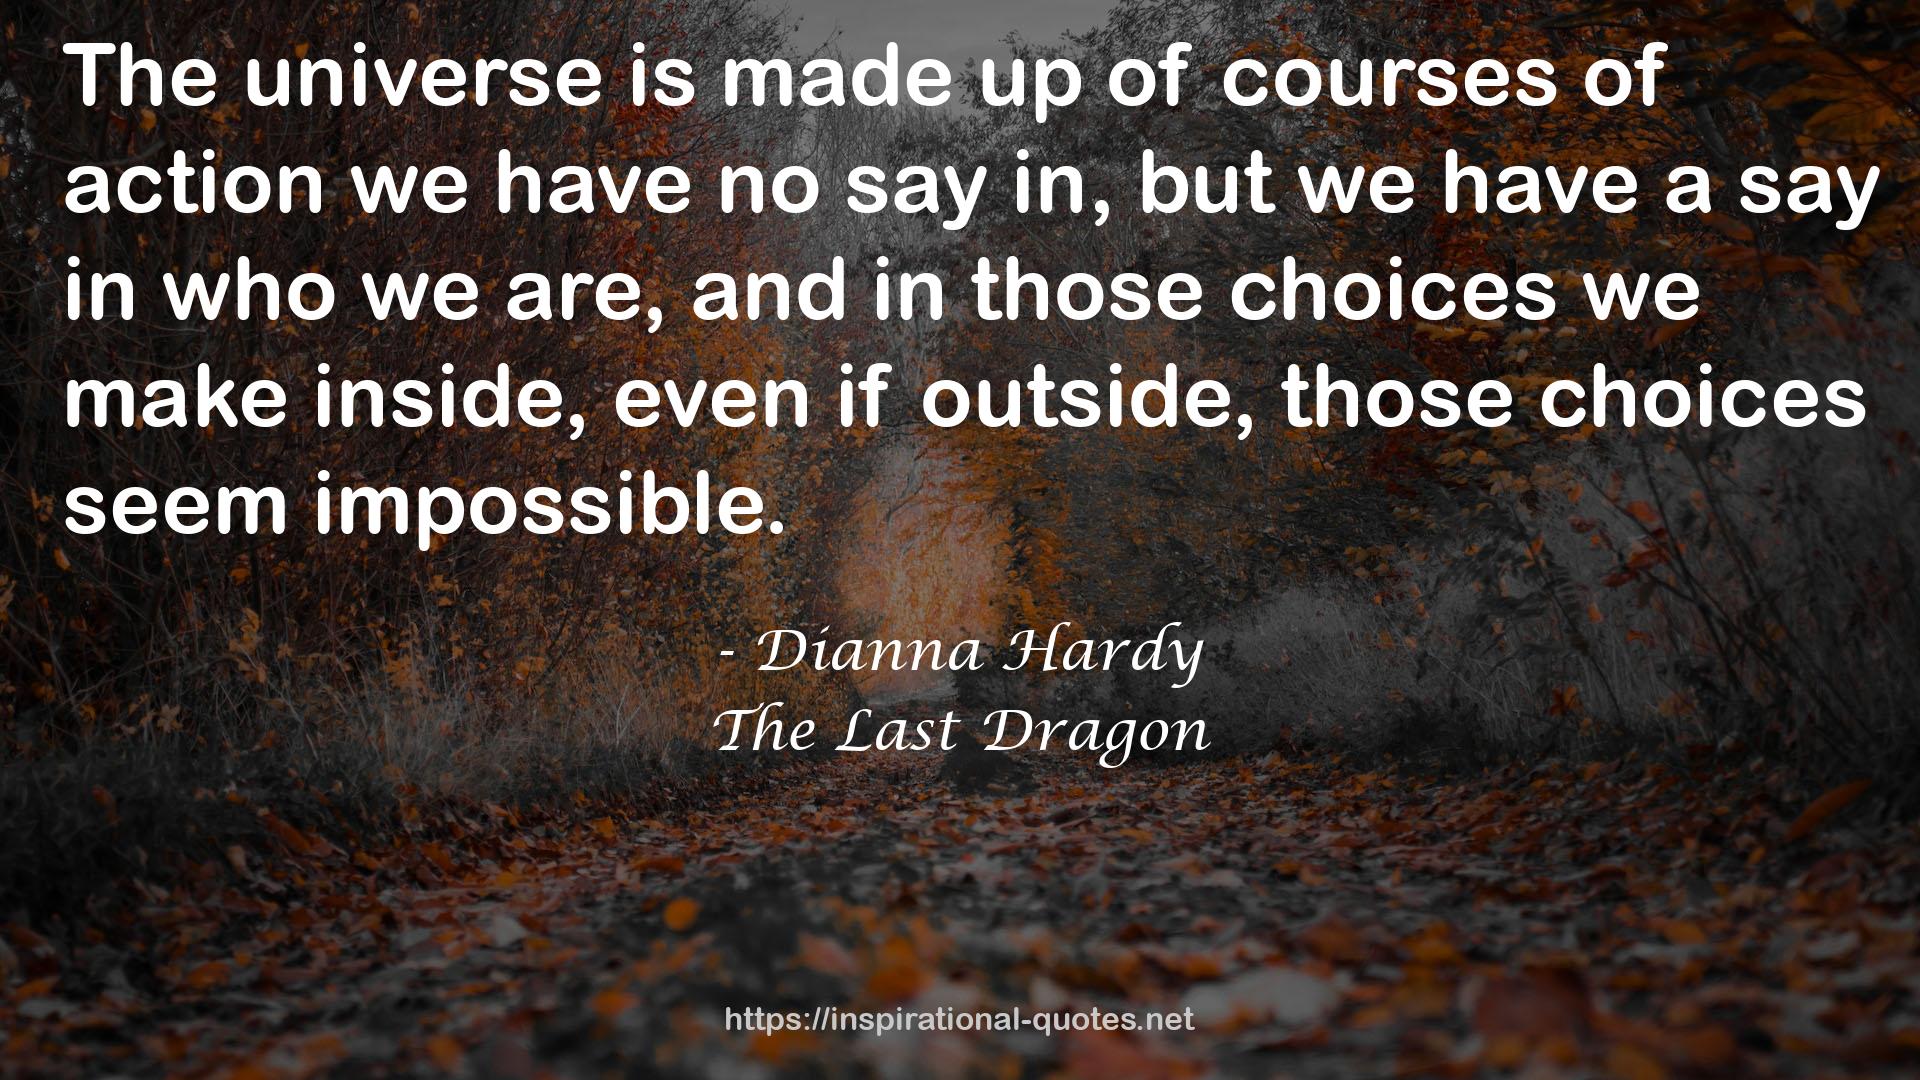 Dianna Hardy QUOTES